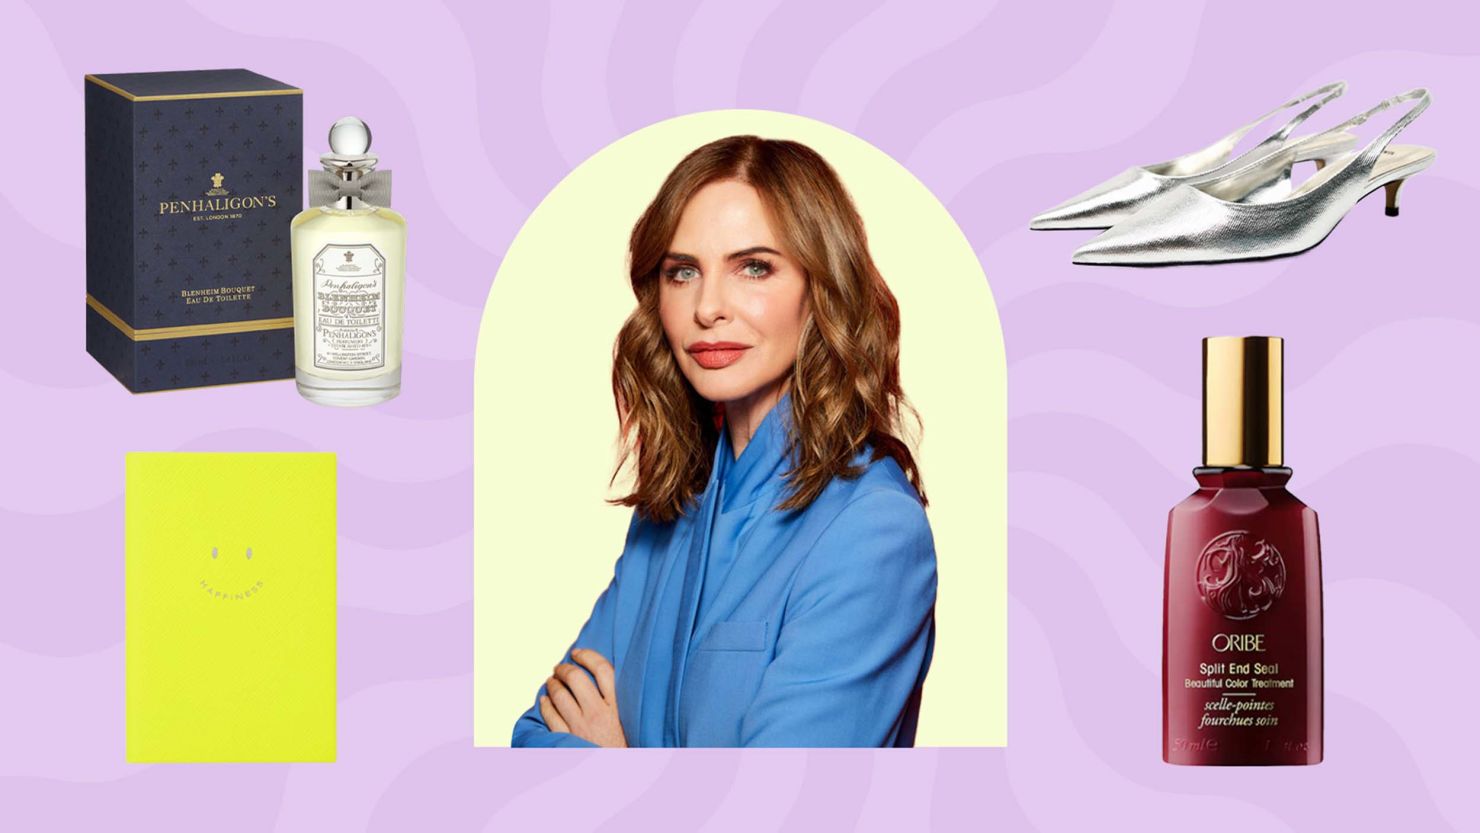 Beauty Entrepreneur Trinny Woodall Shares Her 10 Beauty And Style Must Haves Cnn Underscored